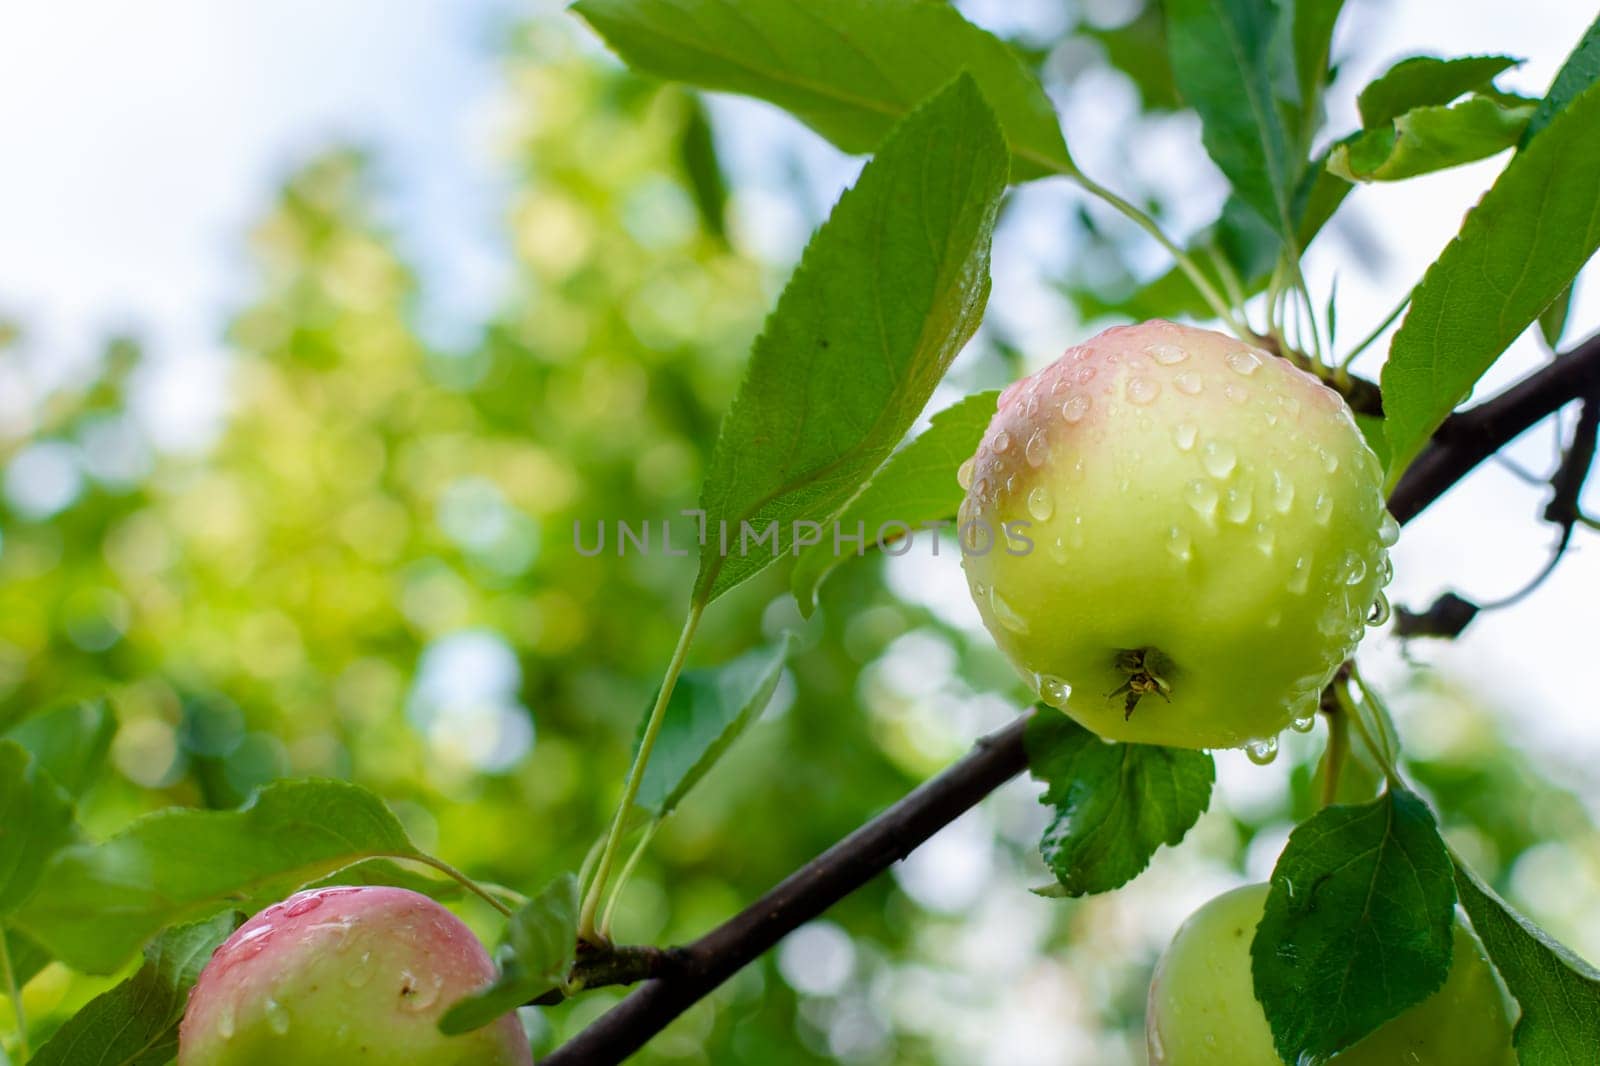 Ripe wet apple in raindrops on a branch in the garden against a blurred background of foliage and sky. Gardening. Harvesting.